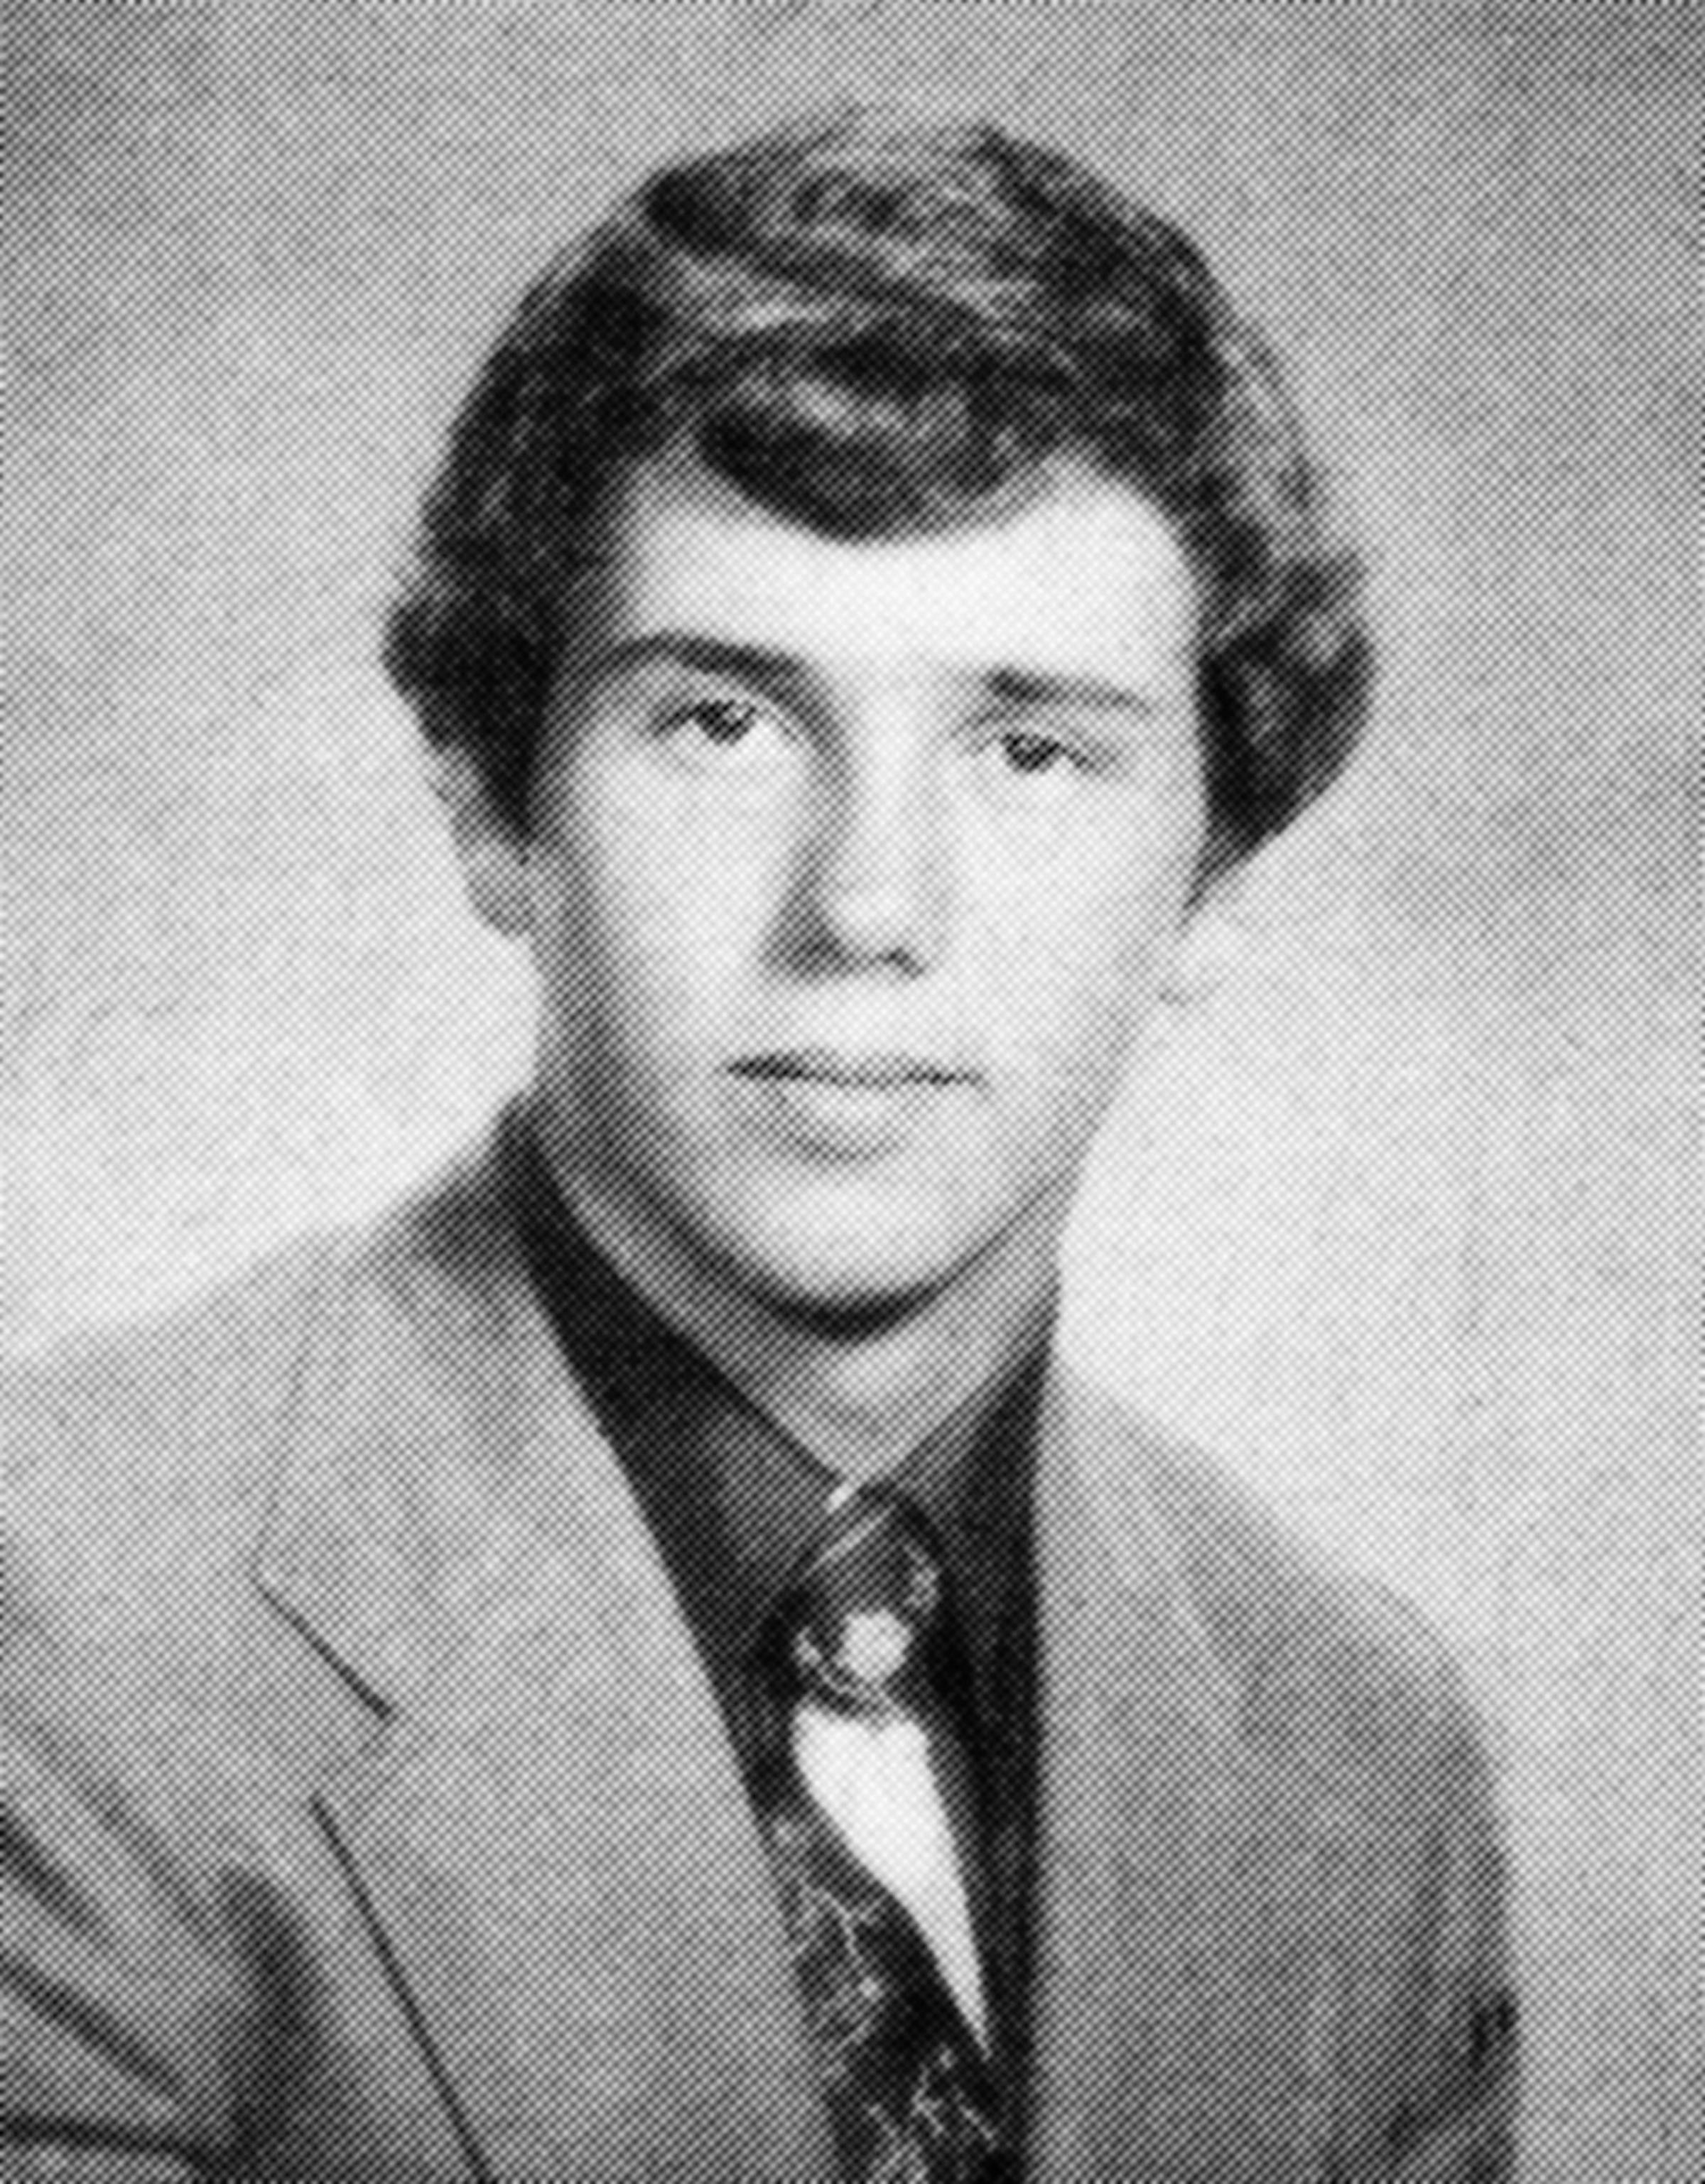 Mike Pence in his senior yearbook photo at Columbus North High School in Columbus, OH in 1977.